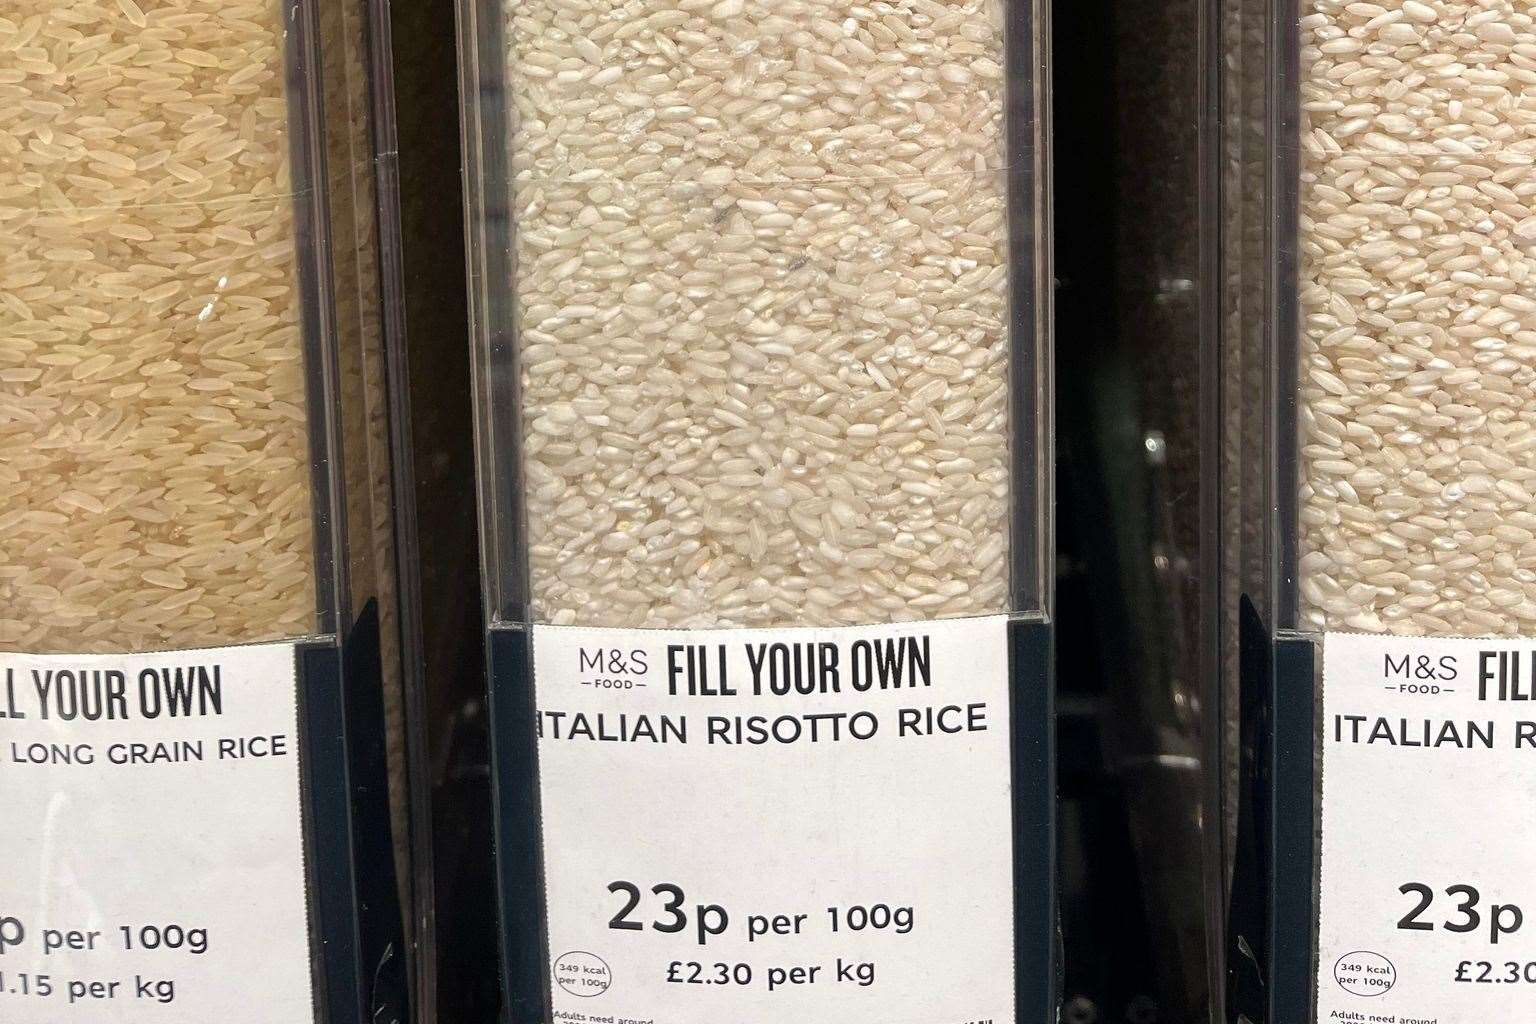 The 'fill your own' rissotto rice dispenser in M&S at Bluewater. Picture: Brad Burnett